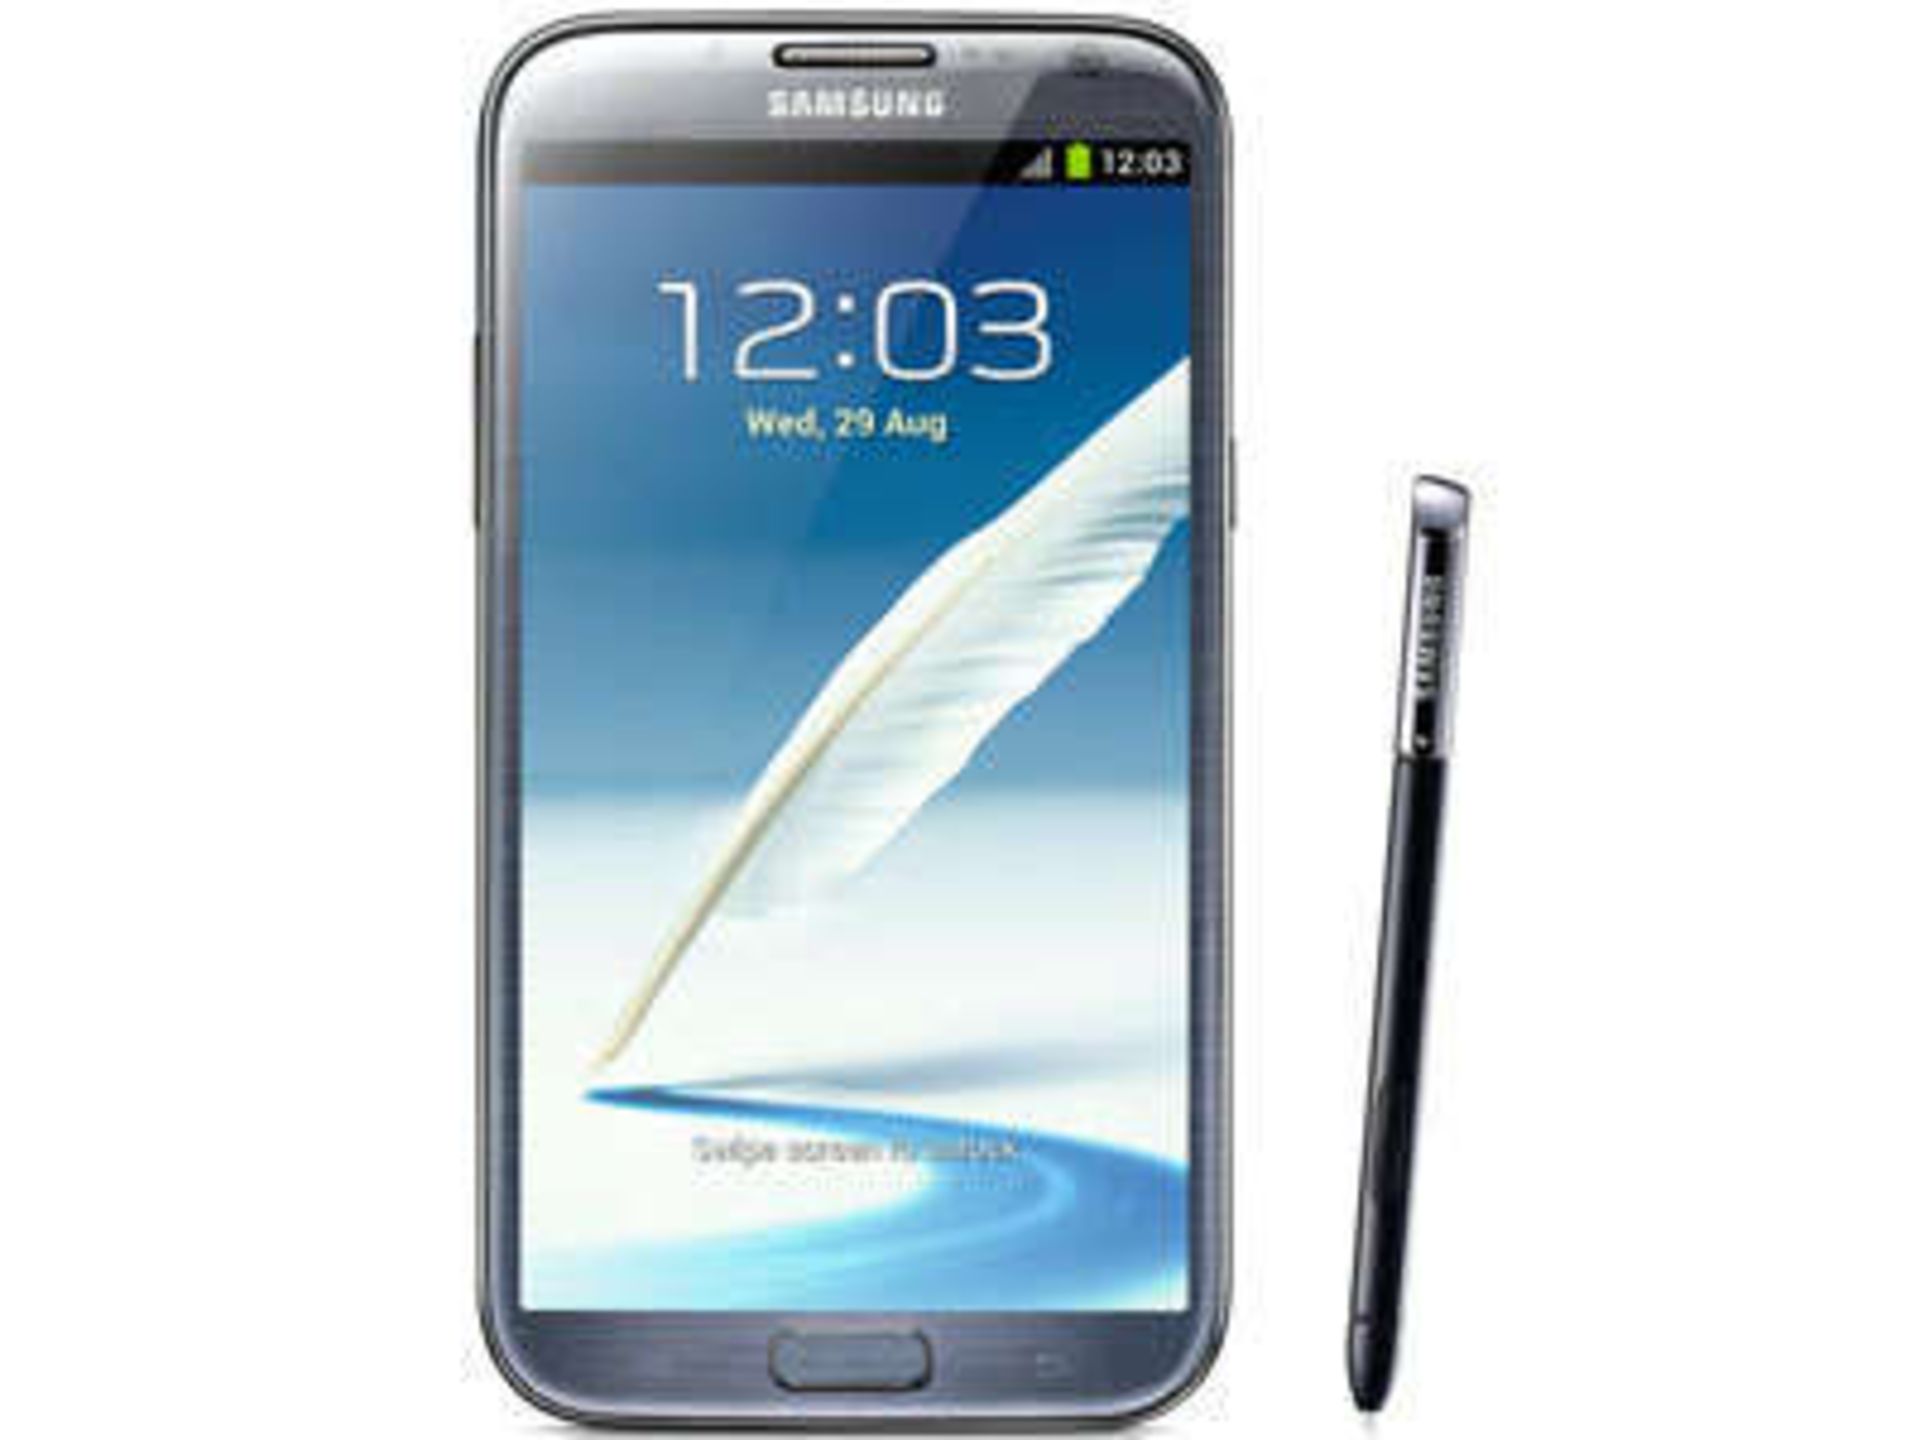 Grade A Samsung Note 2(N7100) Colours May Vary Item available approx 10 working days after sale